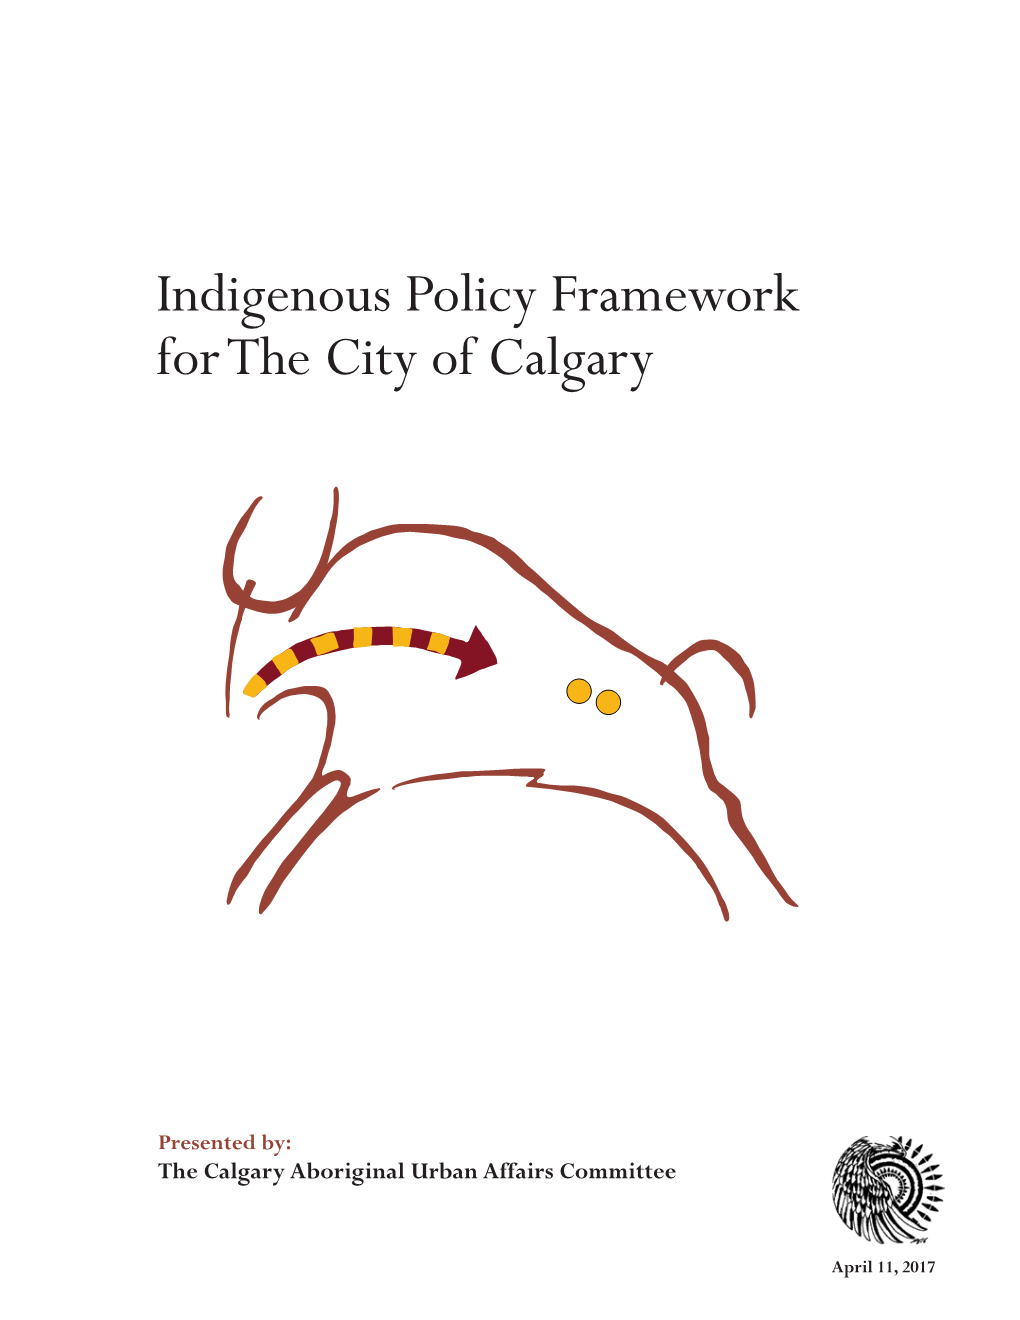 Indigenous Policy Framework for the City of Calgary